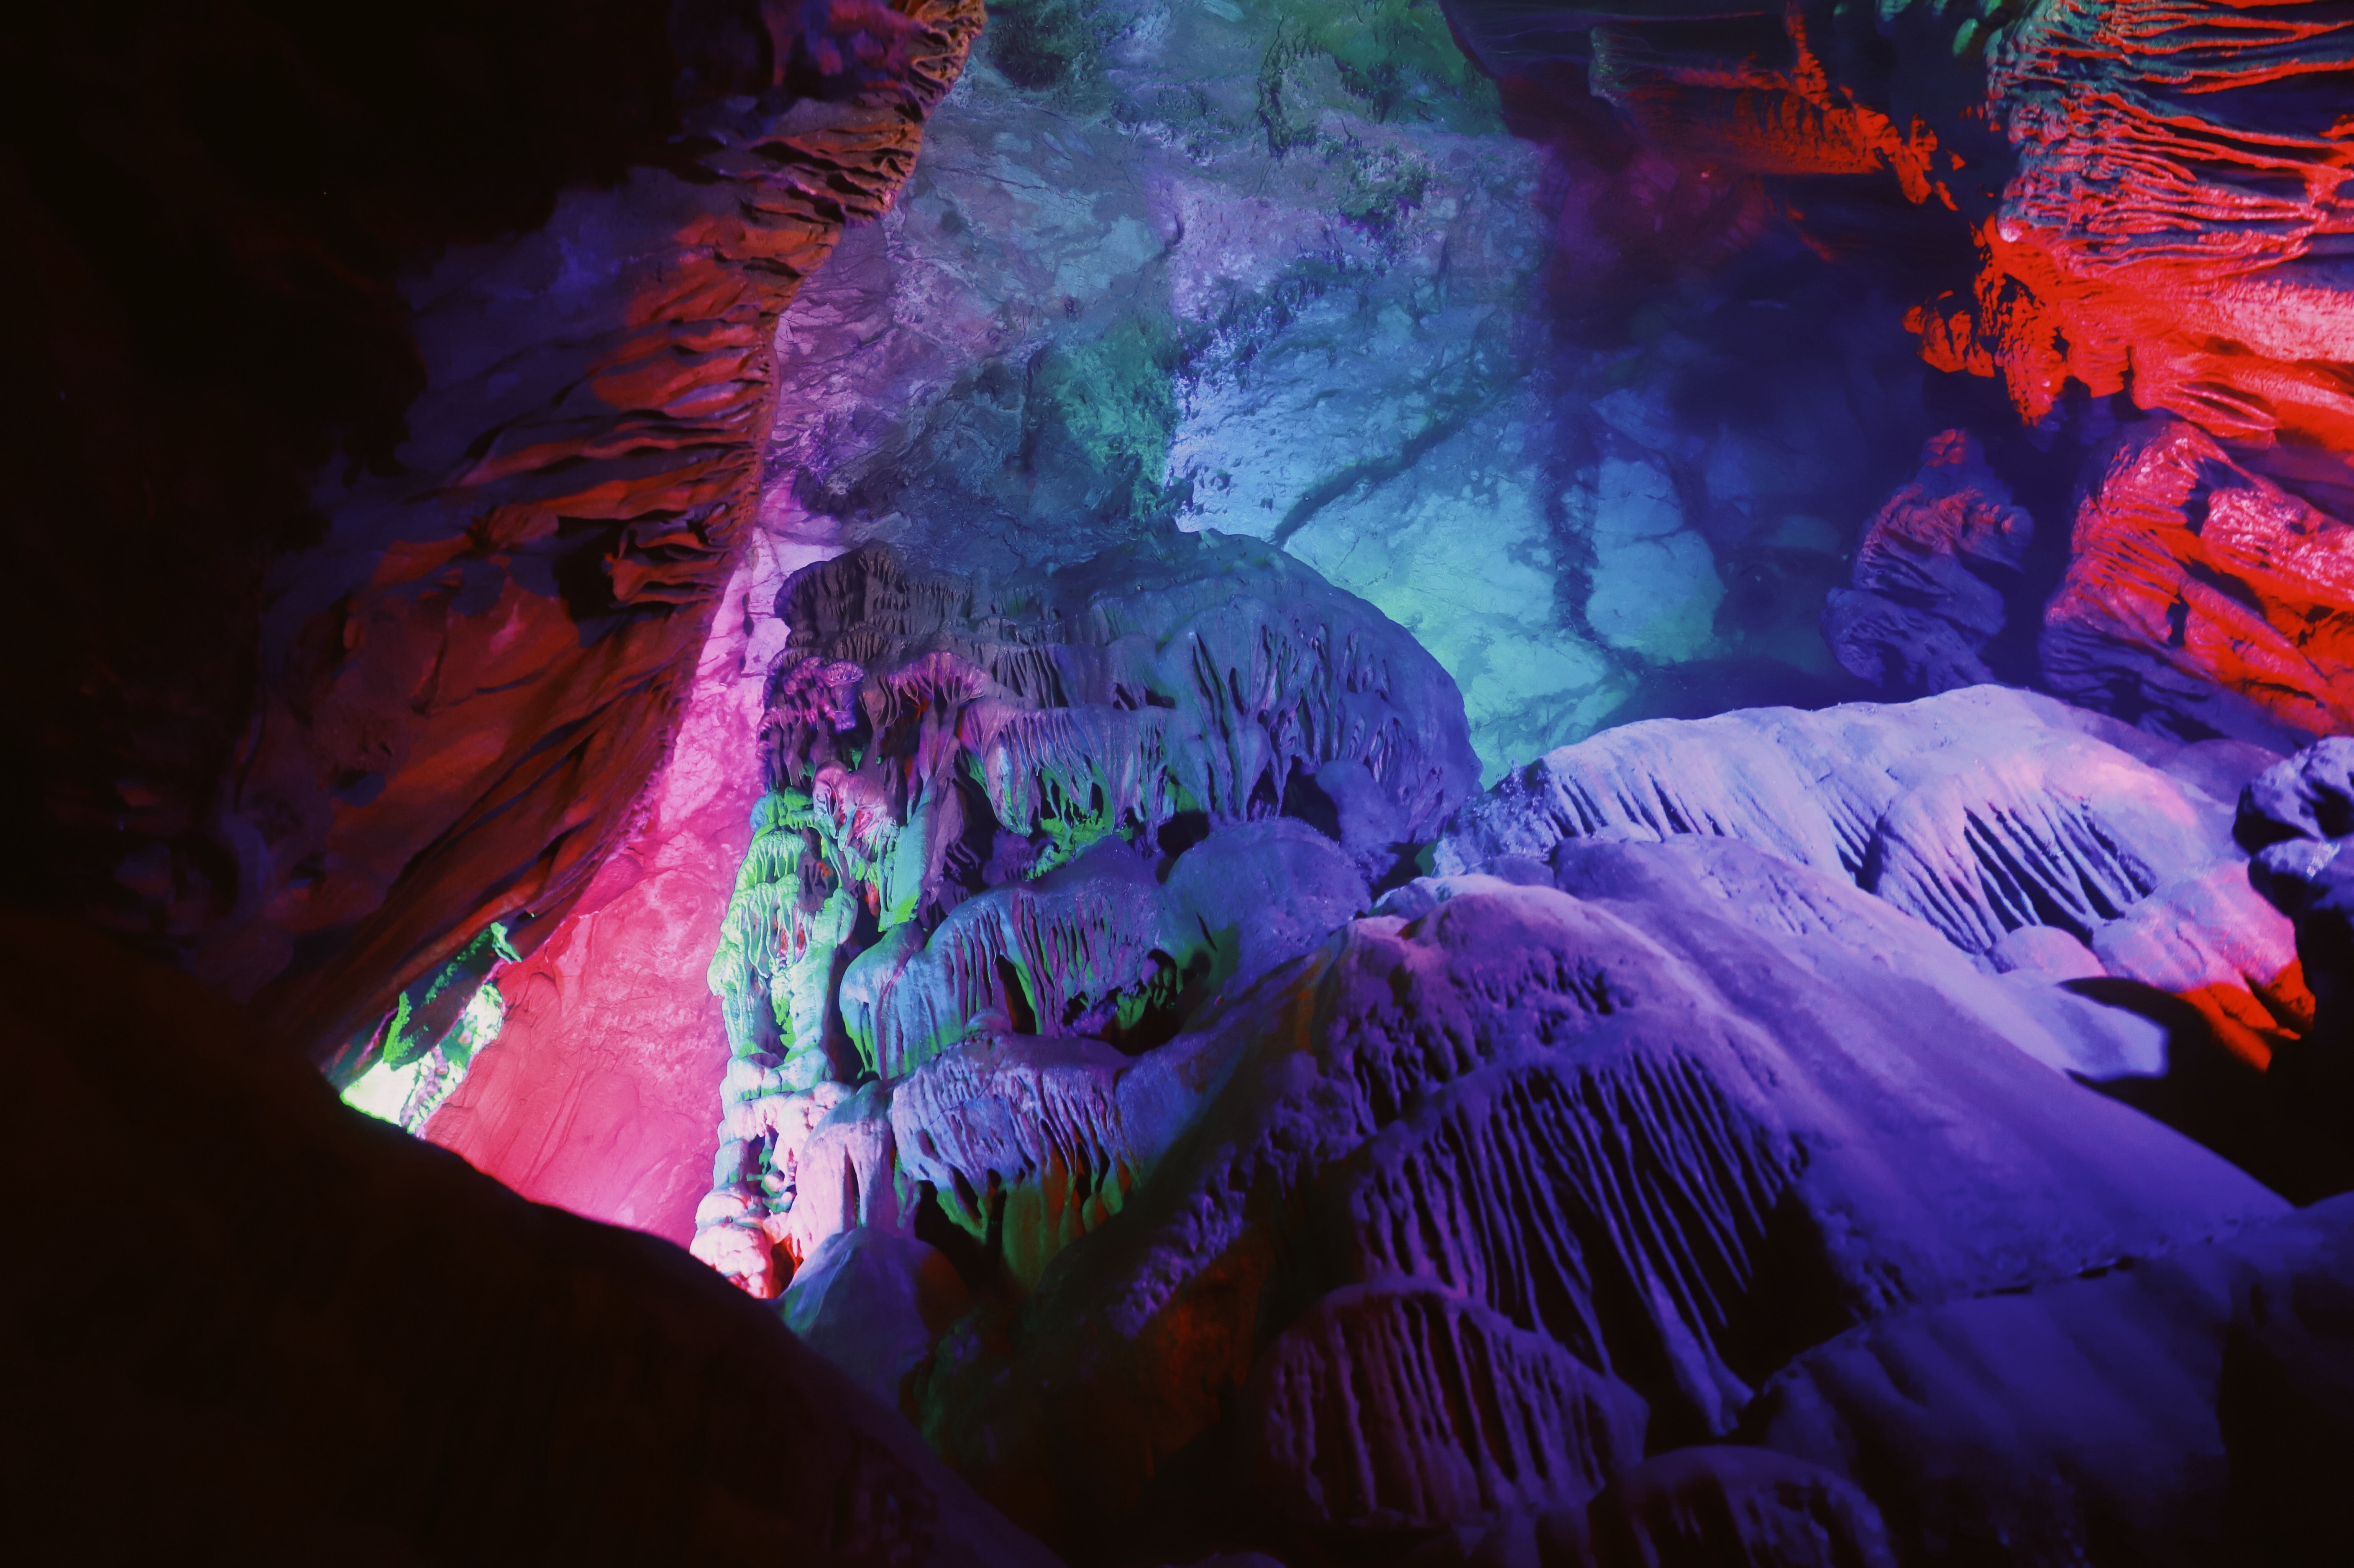 Lights reflect purple against cave walls and ceilings.